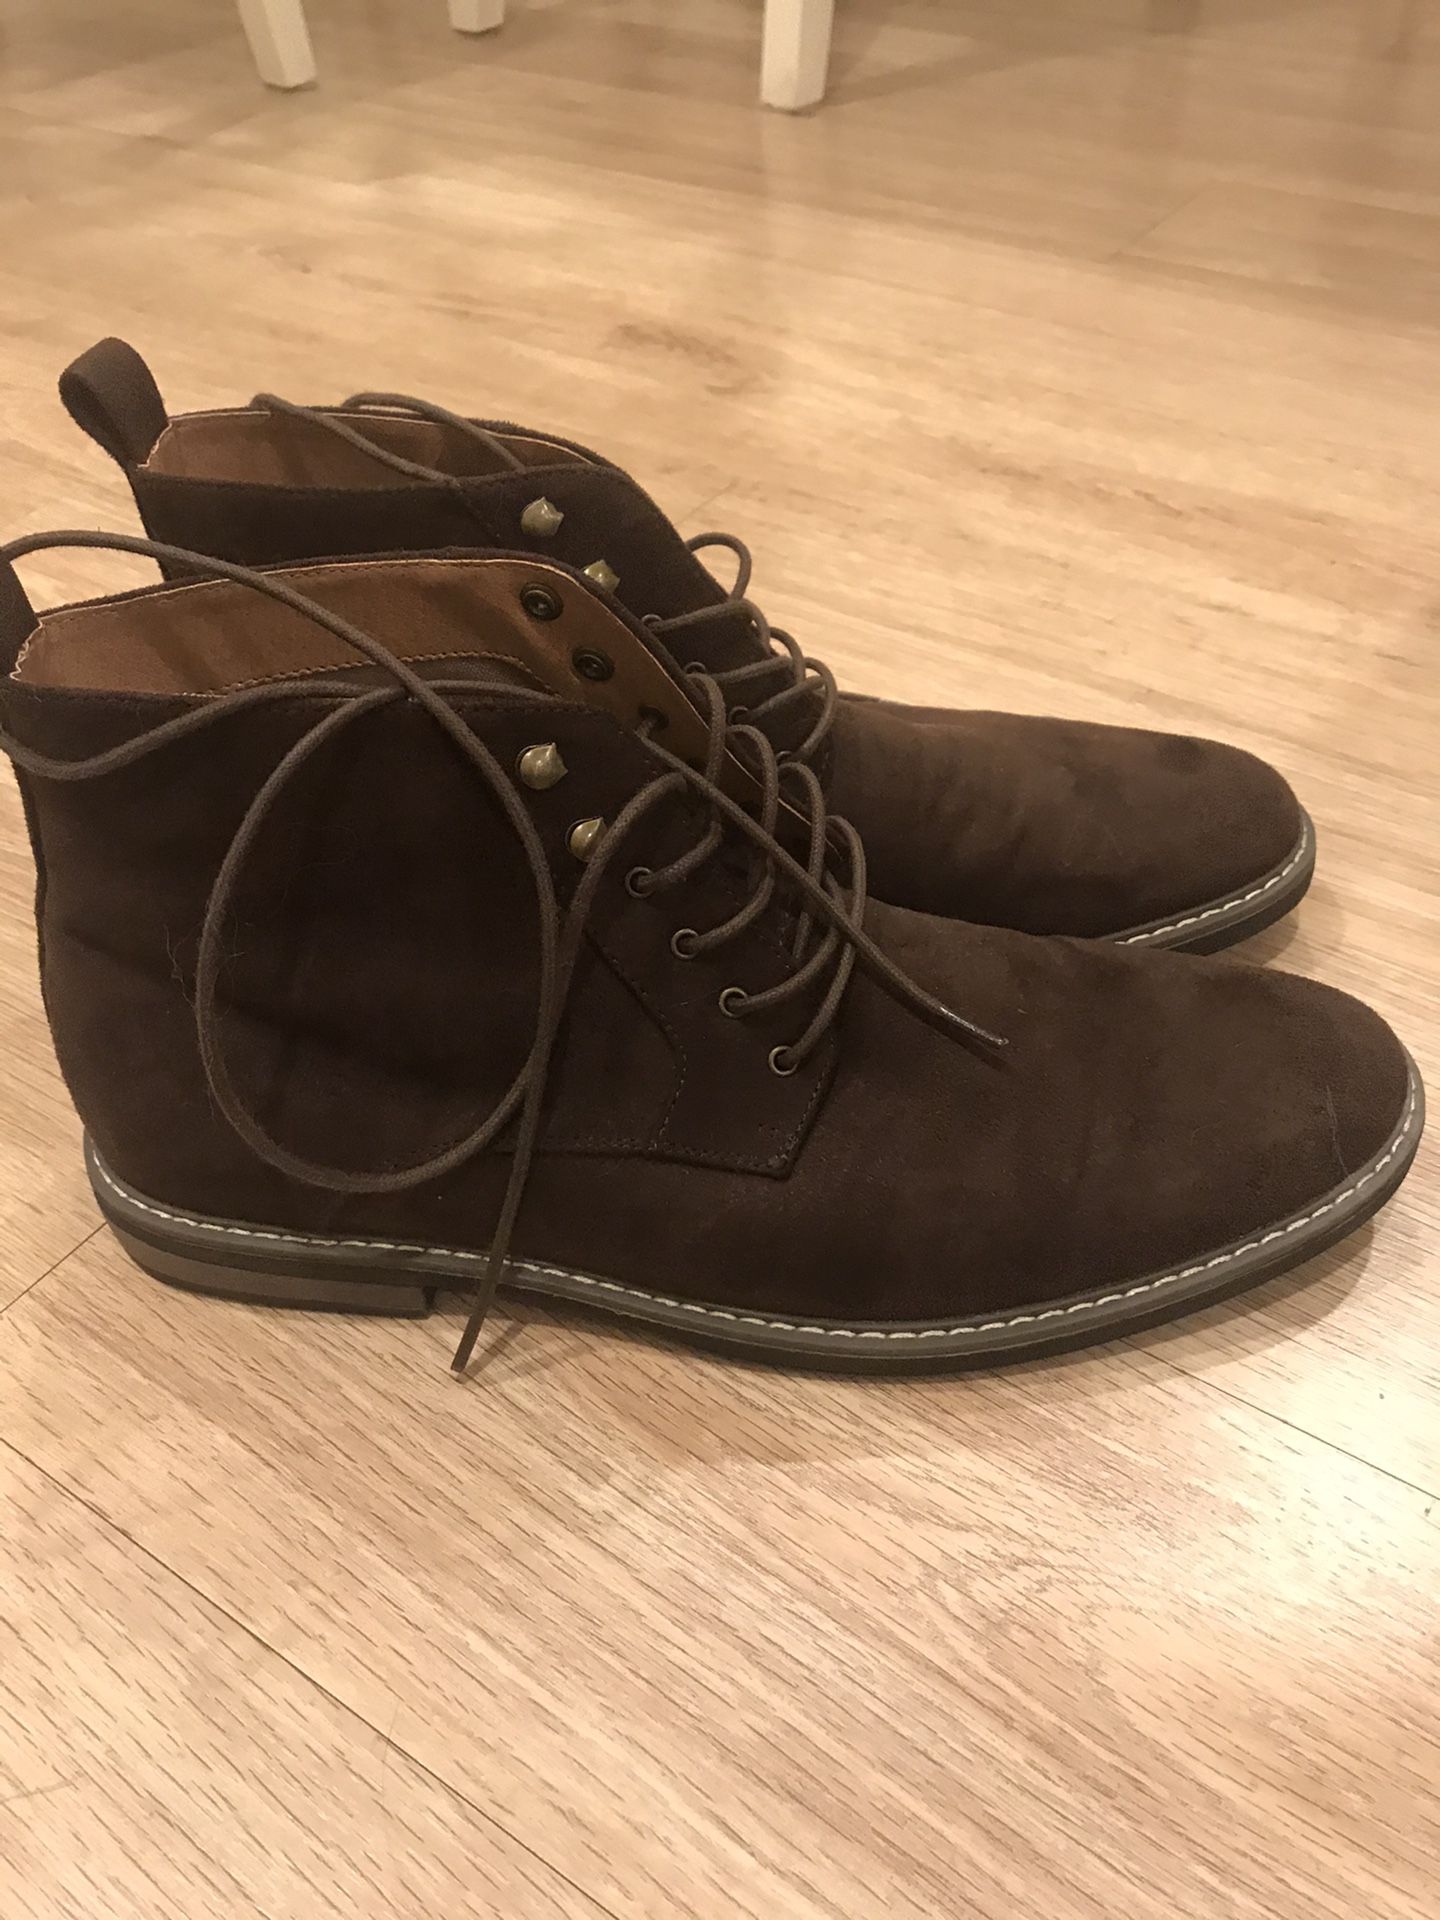 Brand new suede leather boots size 9